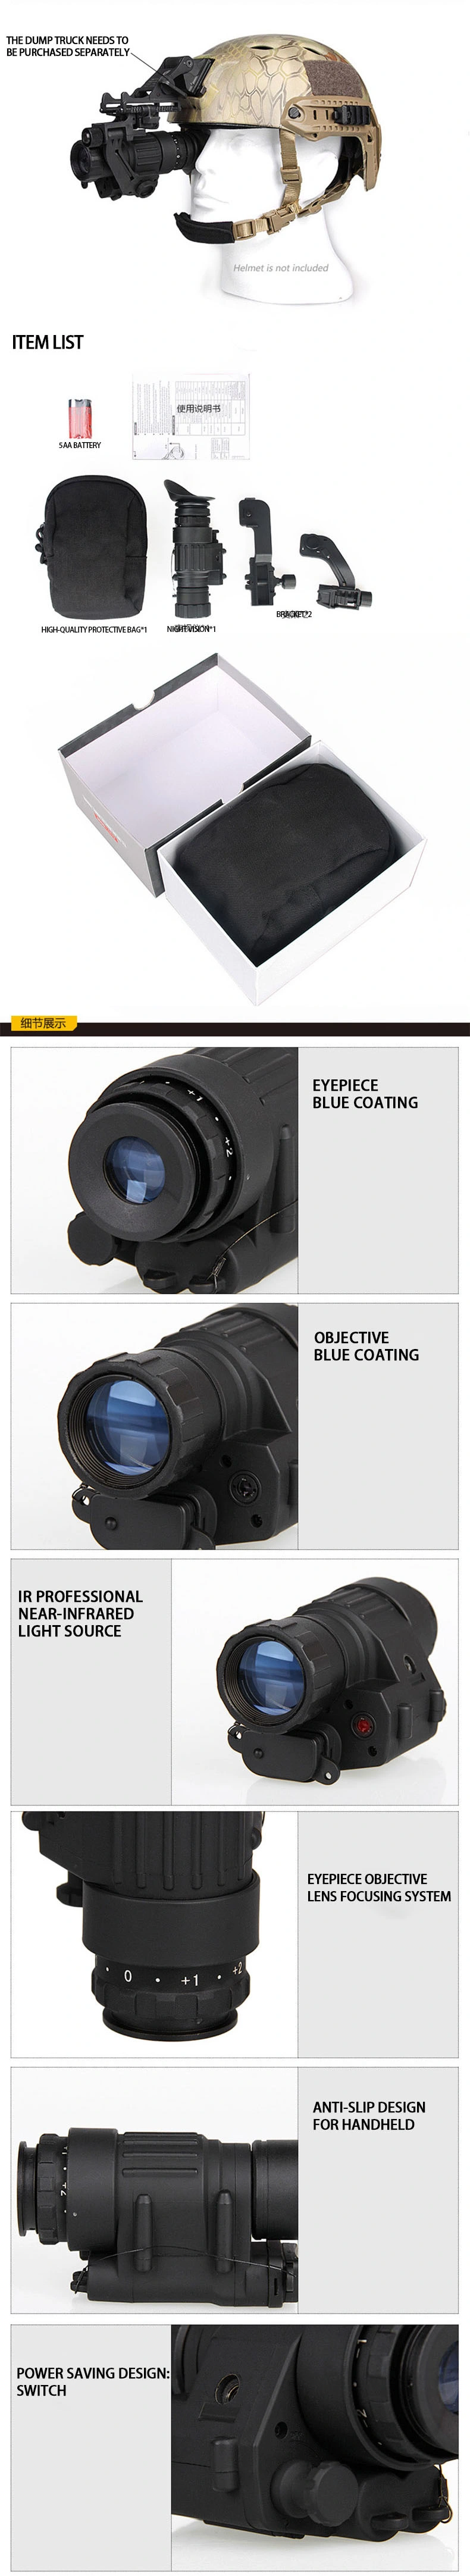 High Quality, Clear and Widely Used Nightvision Monocular Monocular Scope Night Vision